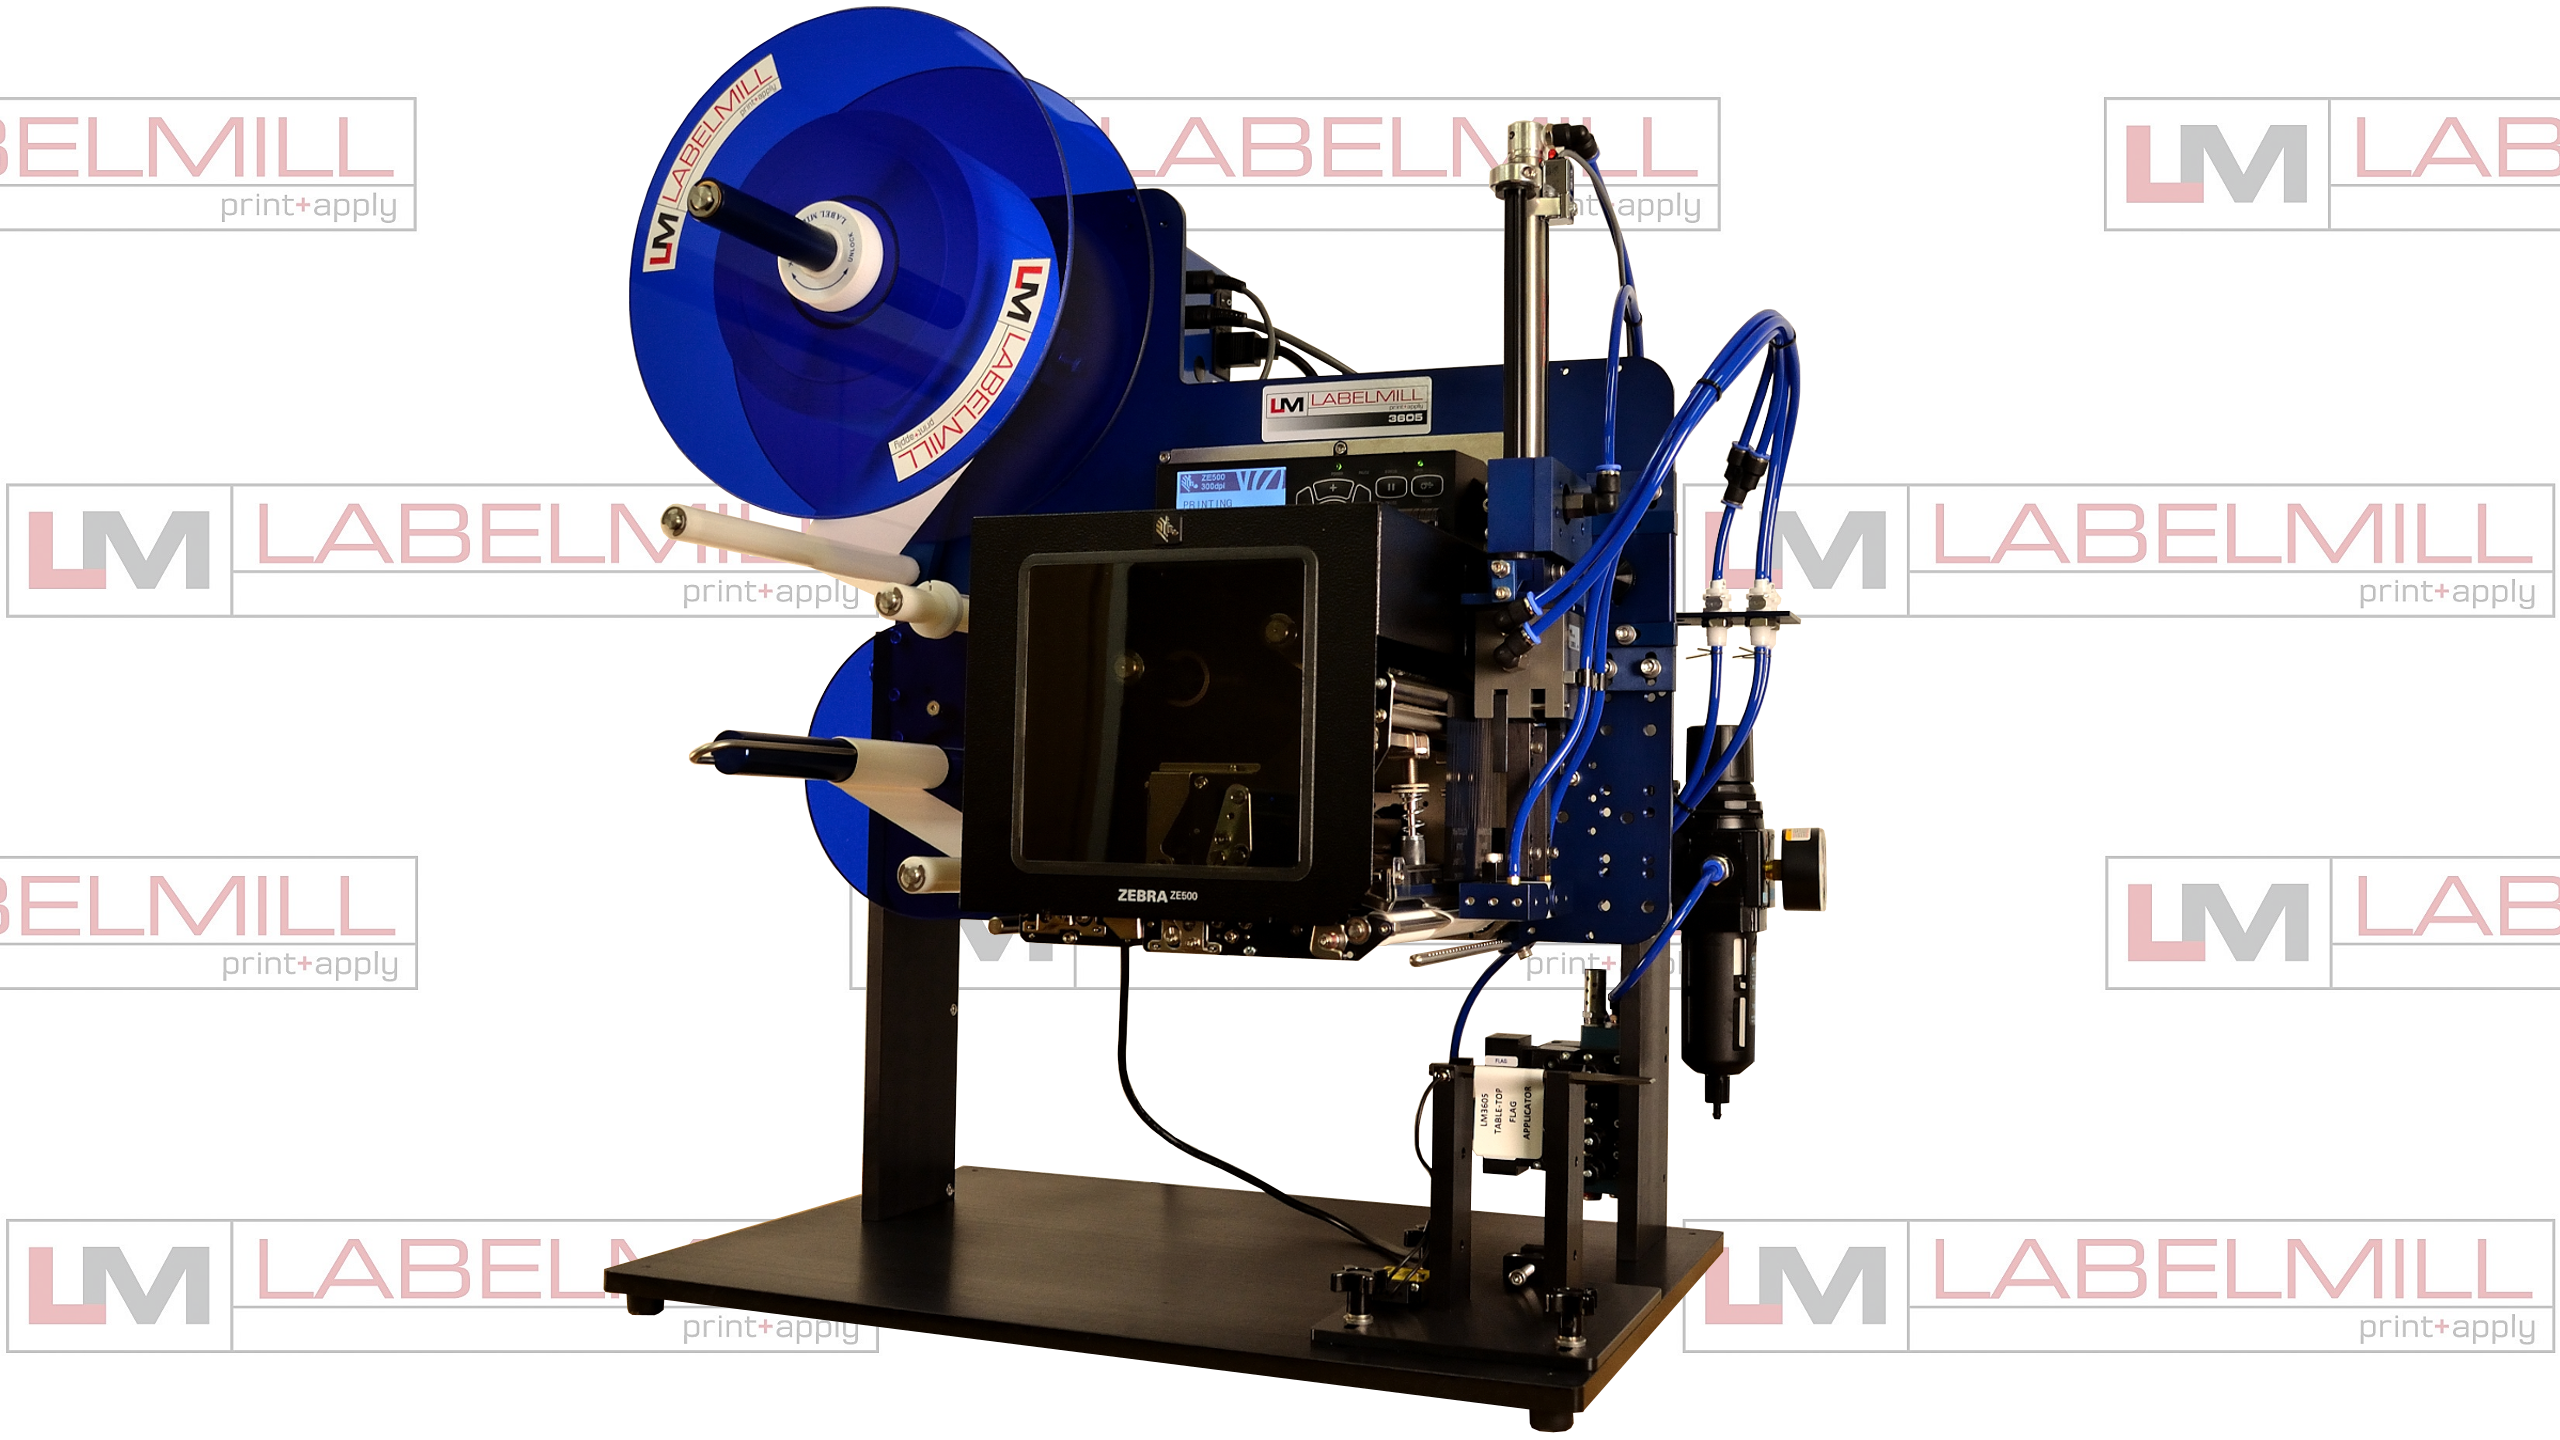 LM3606 Table-Top Print & Apply Flag Label Applicator